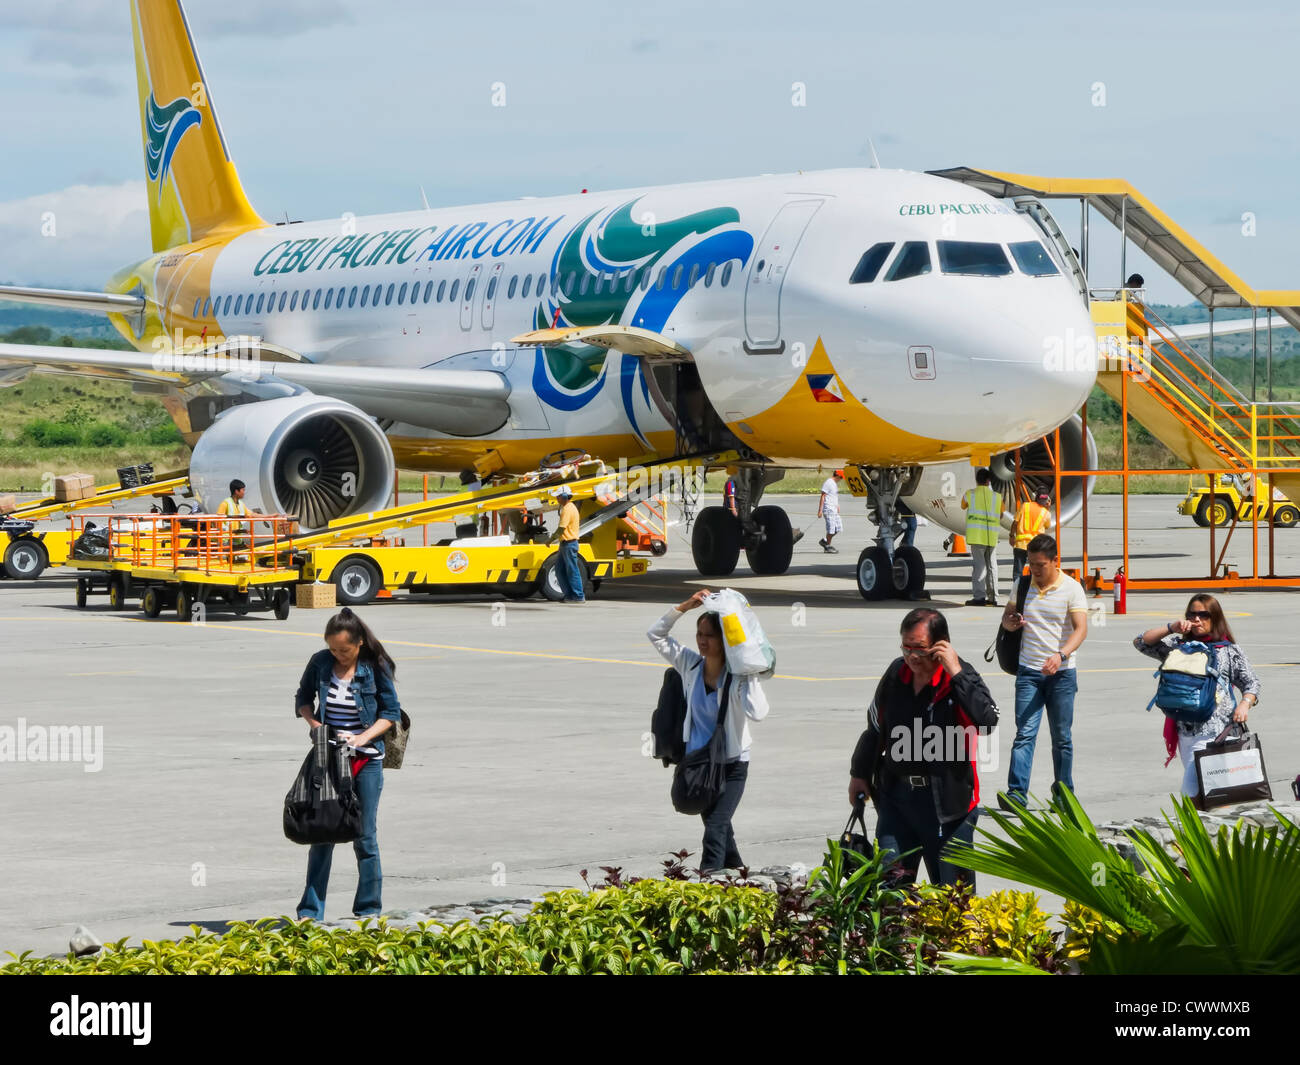 Gensan, Philippines - April 2, 2011: Travelers alight Cebu Pacific Air after landing in Gensan on a very hot day, while airport Stock Photo